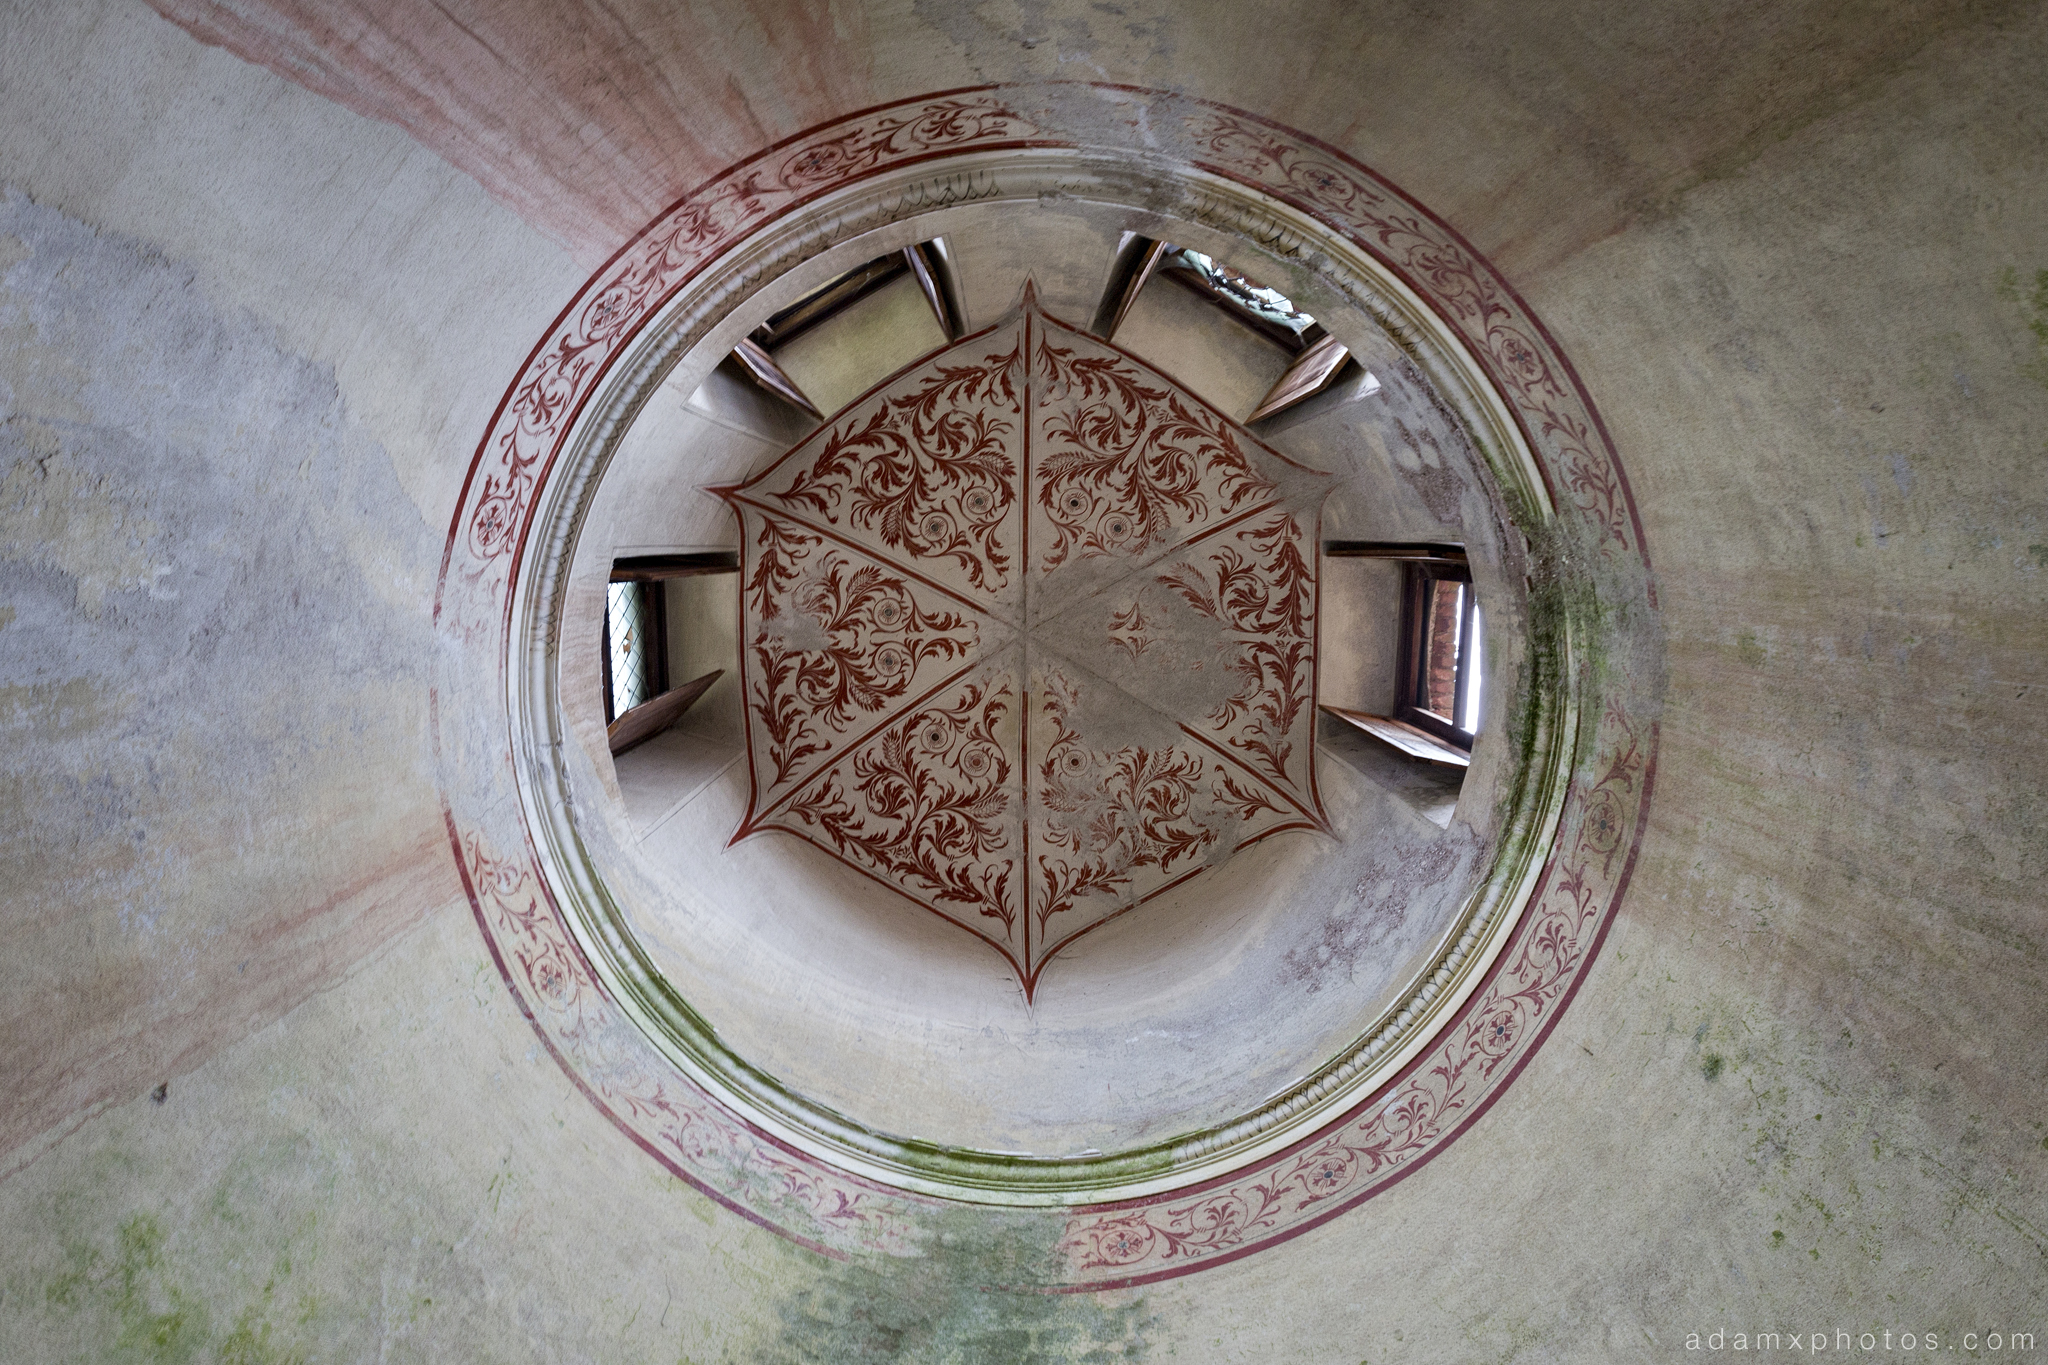 Castello di R Italy castle Urbex Adam X Urban Exploration ceiling rose windows painted painting ornate looking up photo photos report decay detail UE abandoned derelict unused empty disused decay decayed decaying grimy grime